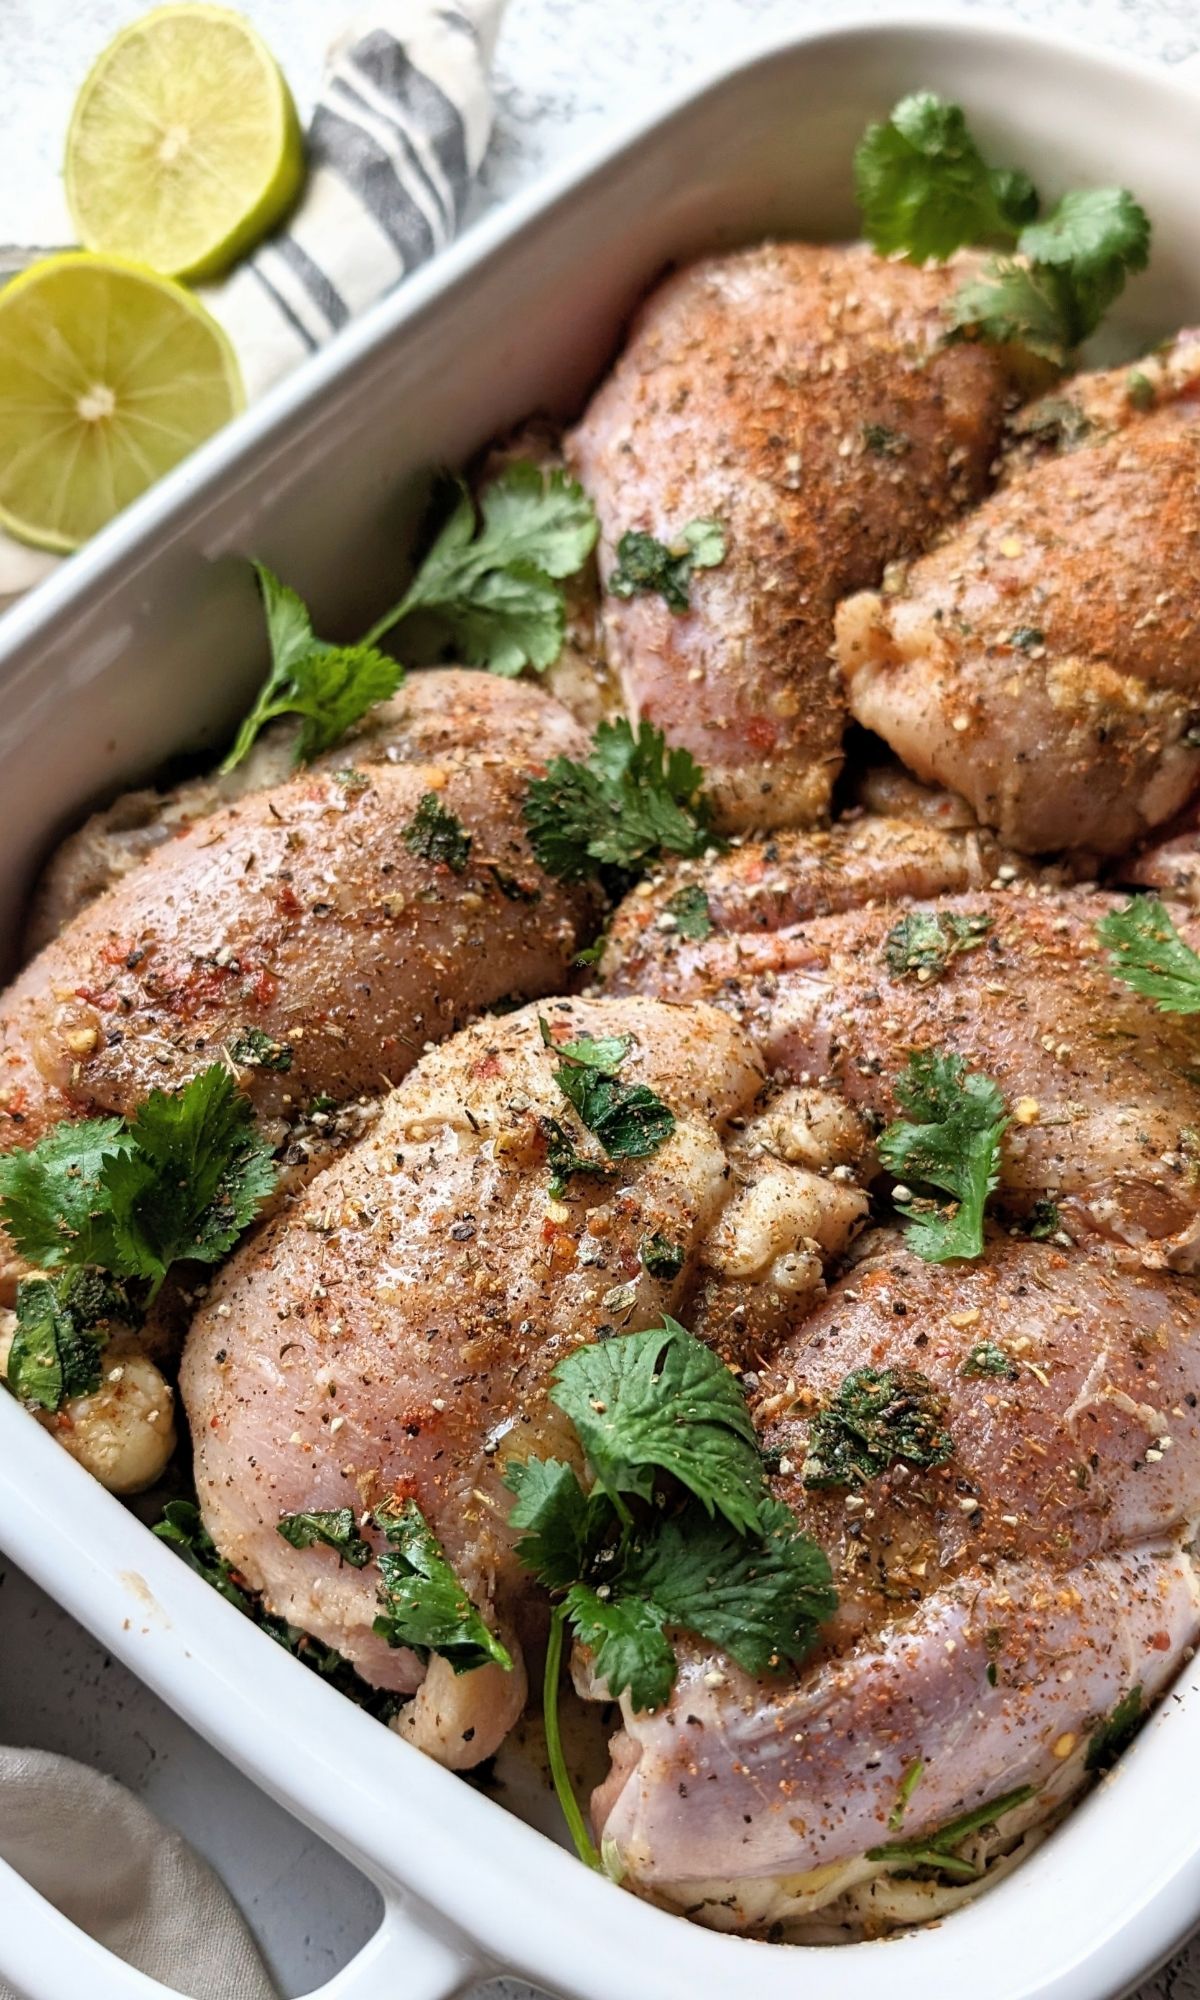 low sodium jerk marinade recipe with allspice cinnamon and ginger over chicken thighs in a baking dish with fresh herbs and lime